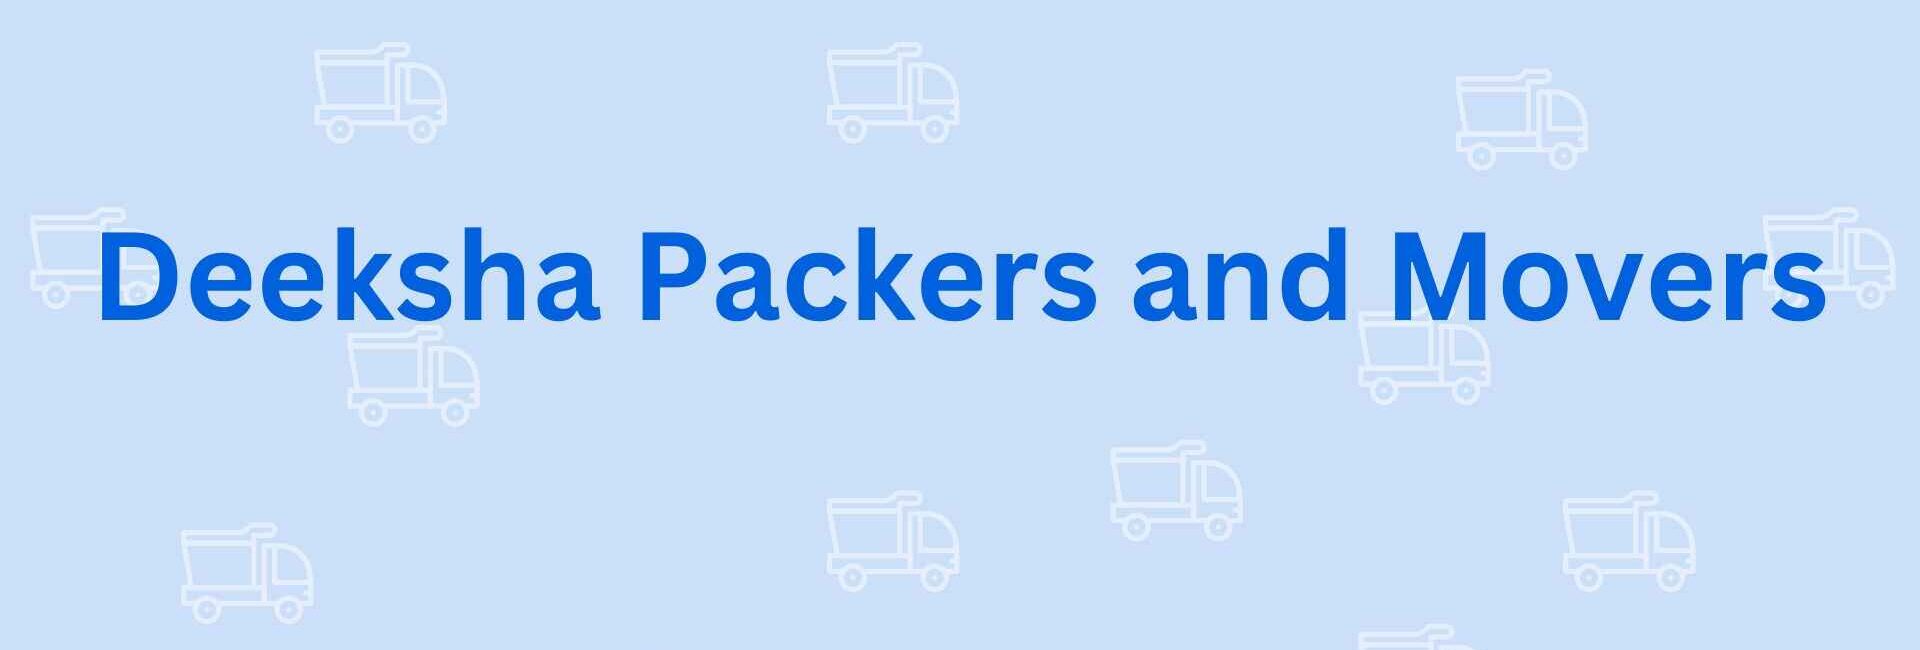 Deeksha Packers and Movers - Packers and Movers in Noida